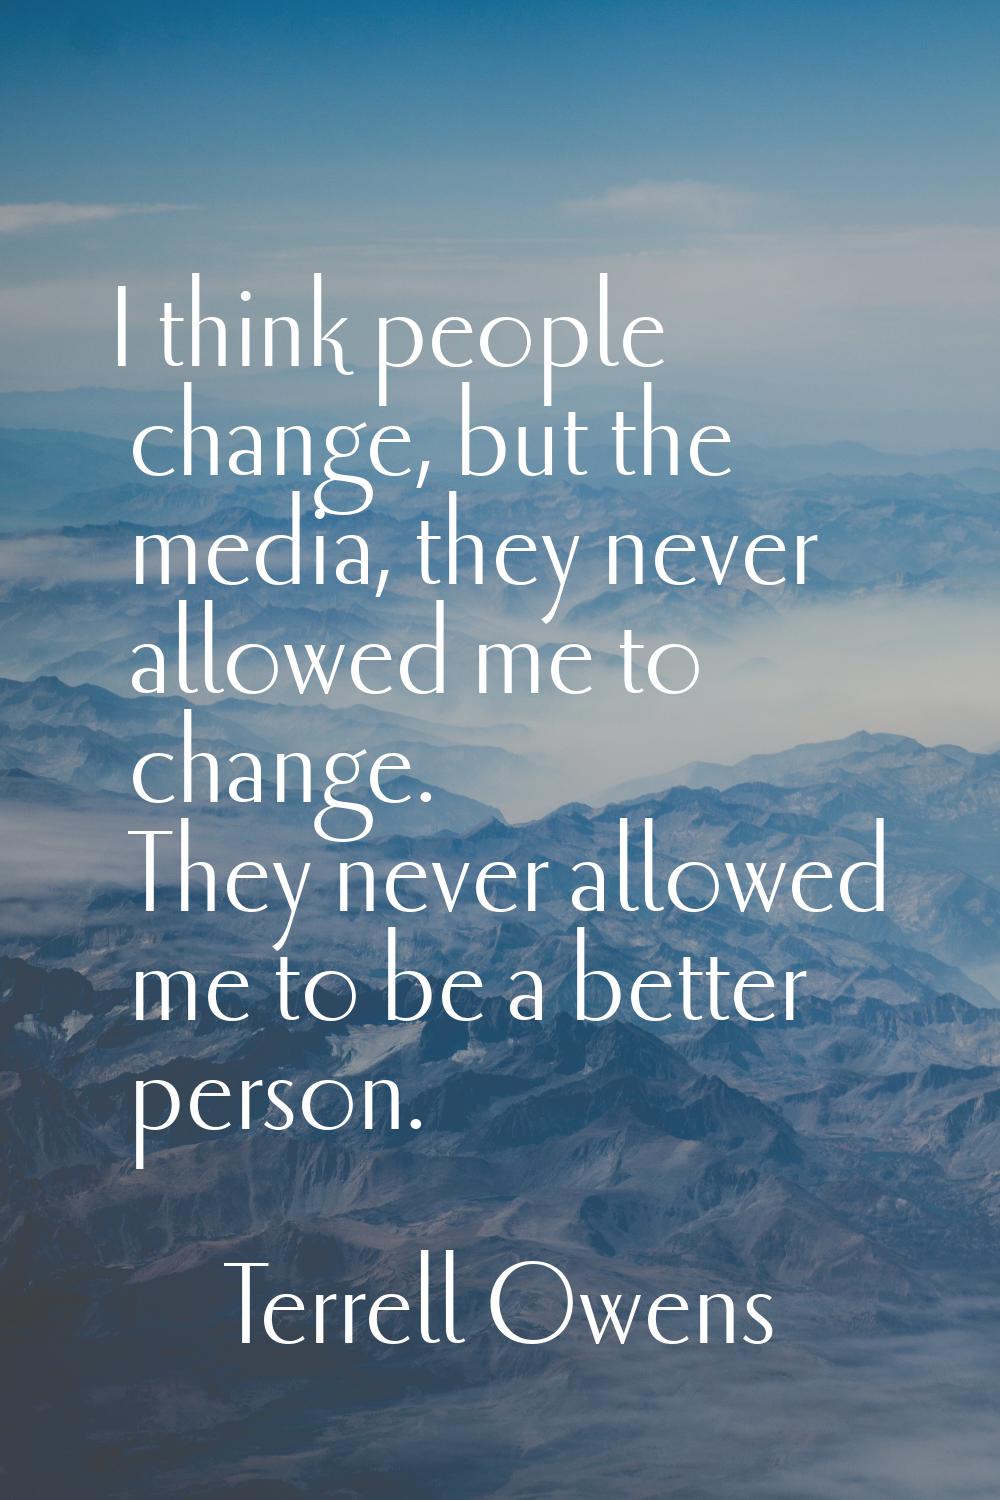 I think people change, but the media, they never allowed me to change. They never allowed me to be 